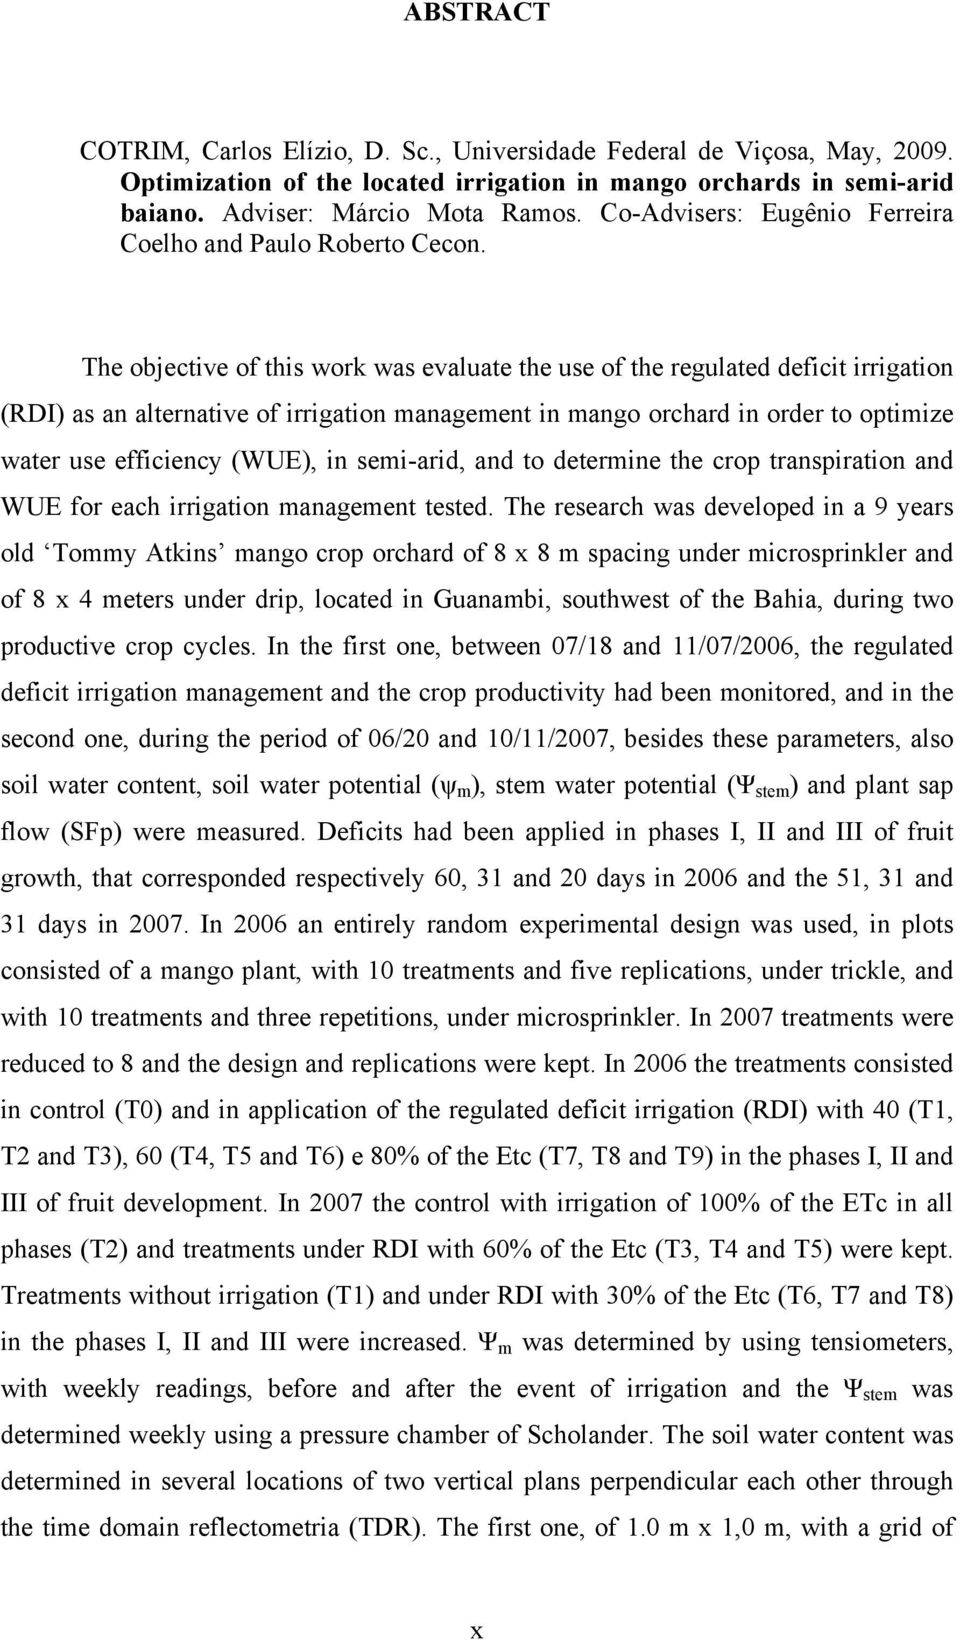 The objective of this work was evaluate the use of the regulated deficit irrigation (RDI) as an alternative of irrigation management in mango orchard in order to optimize water use efficiency (WUE),